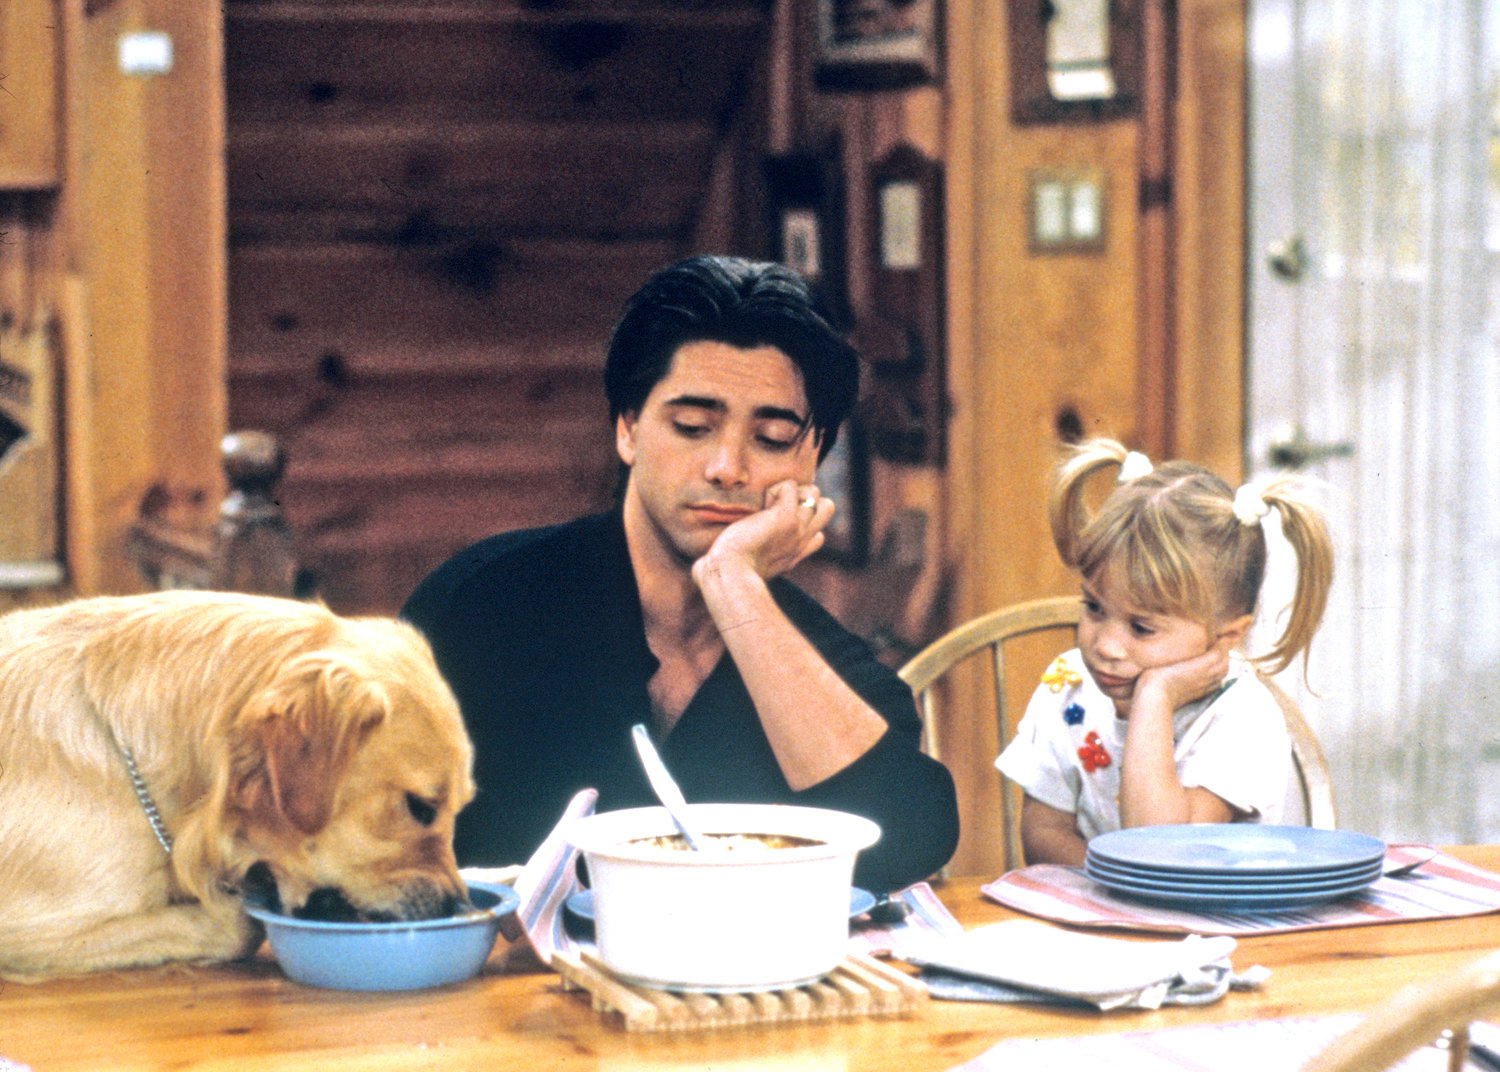 Only 1 Episode of ‘Full House’ Was Actually Filmed in San Fransisco